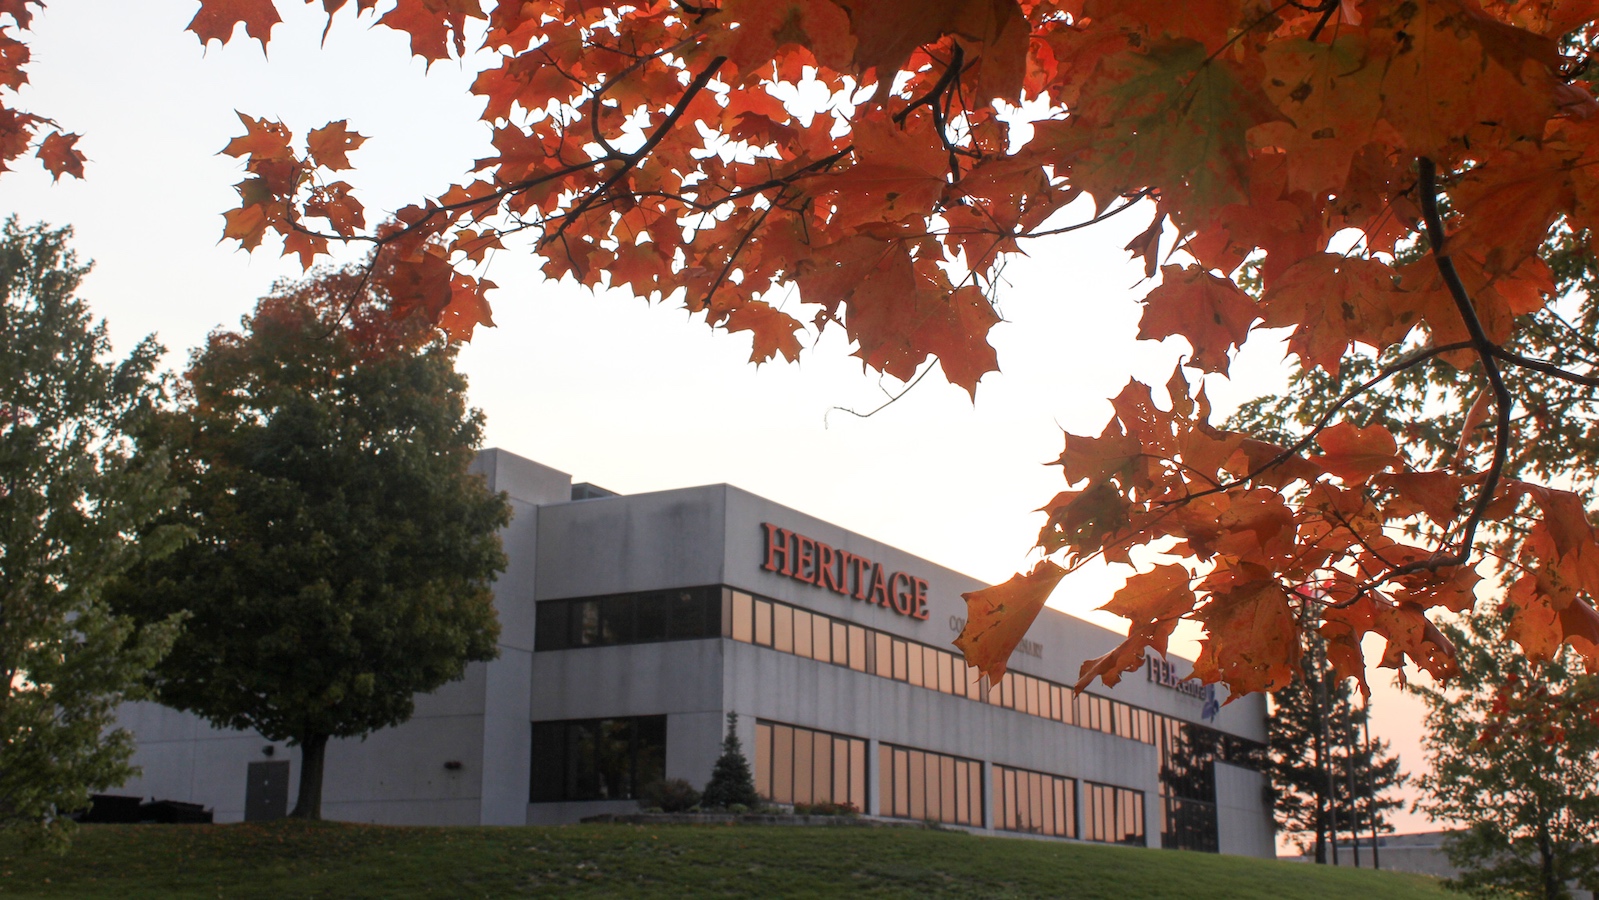 Looking Ahead to Fall 2021 at Heritage College & Seminary